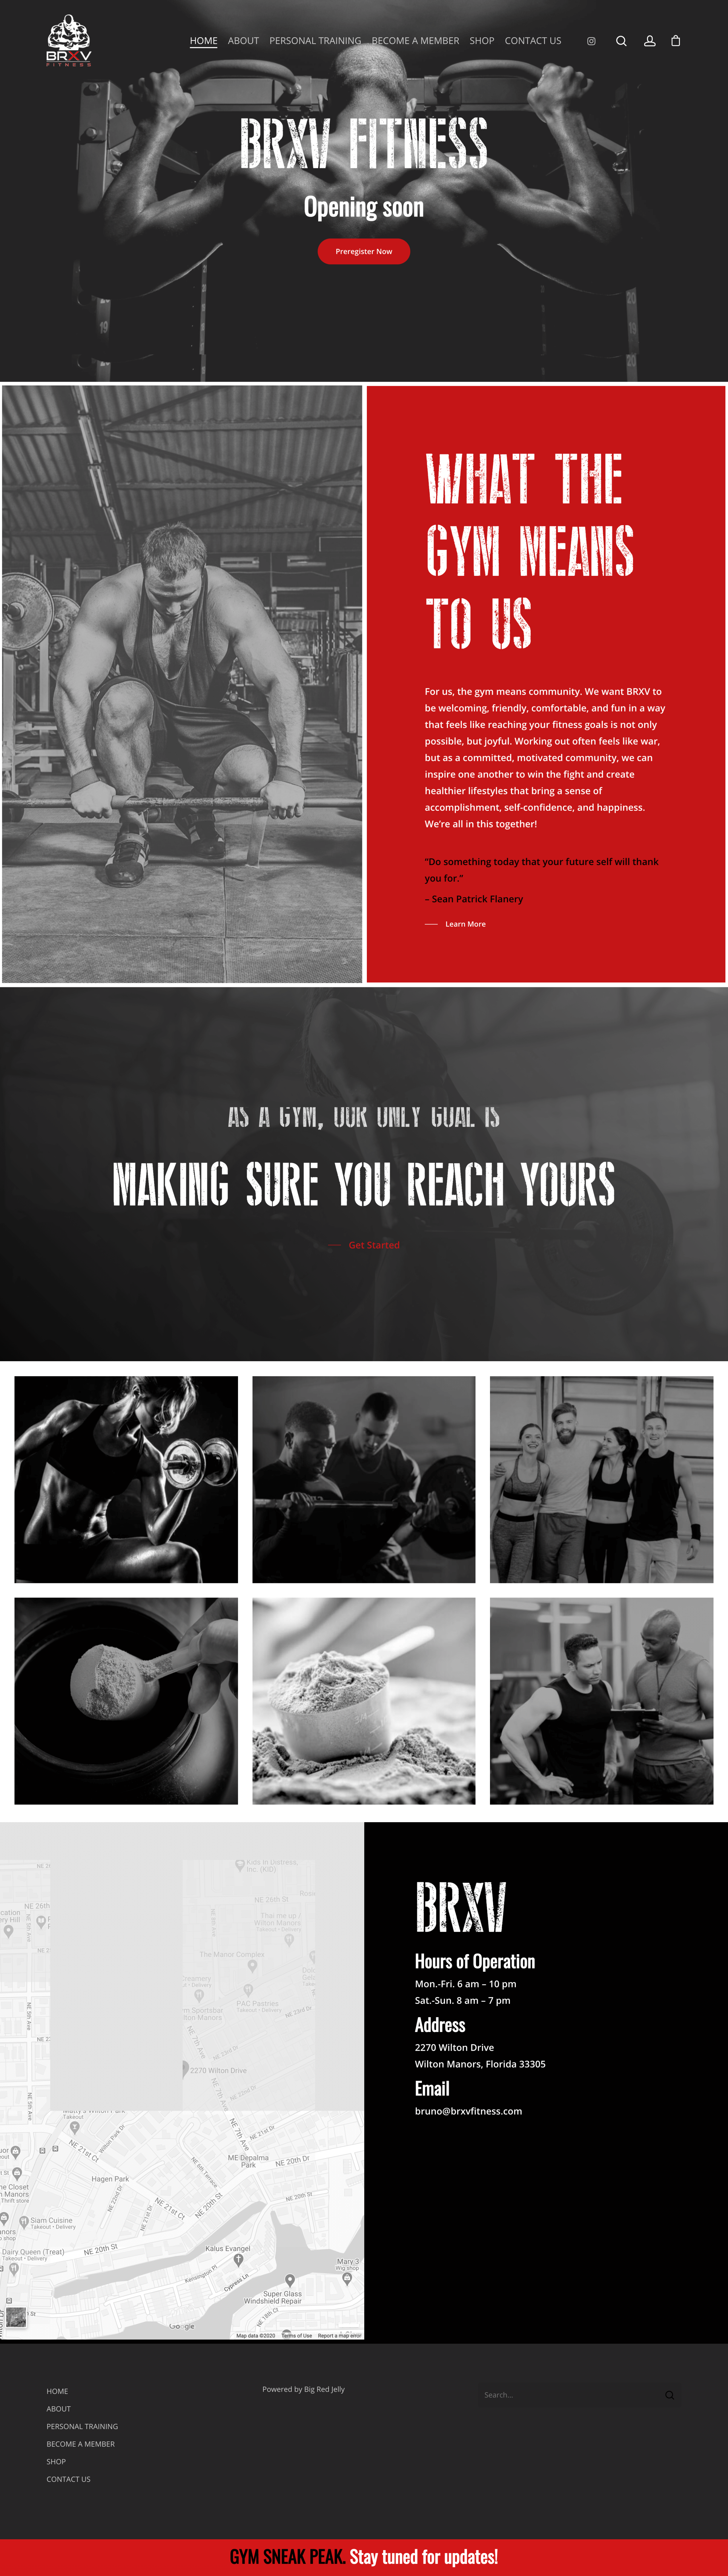 BRXV fitness full website landing page - wordpress wix web design at Big Red Jelly.